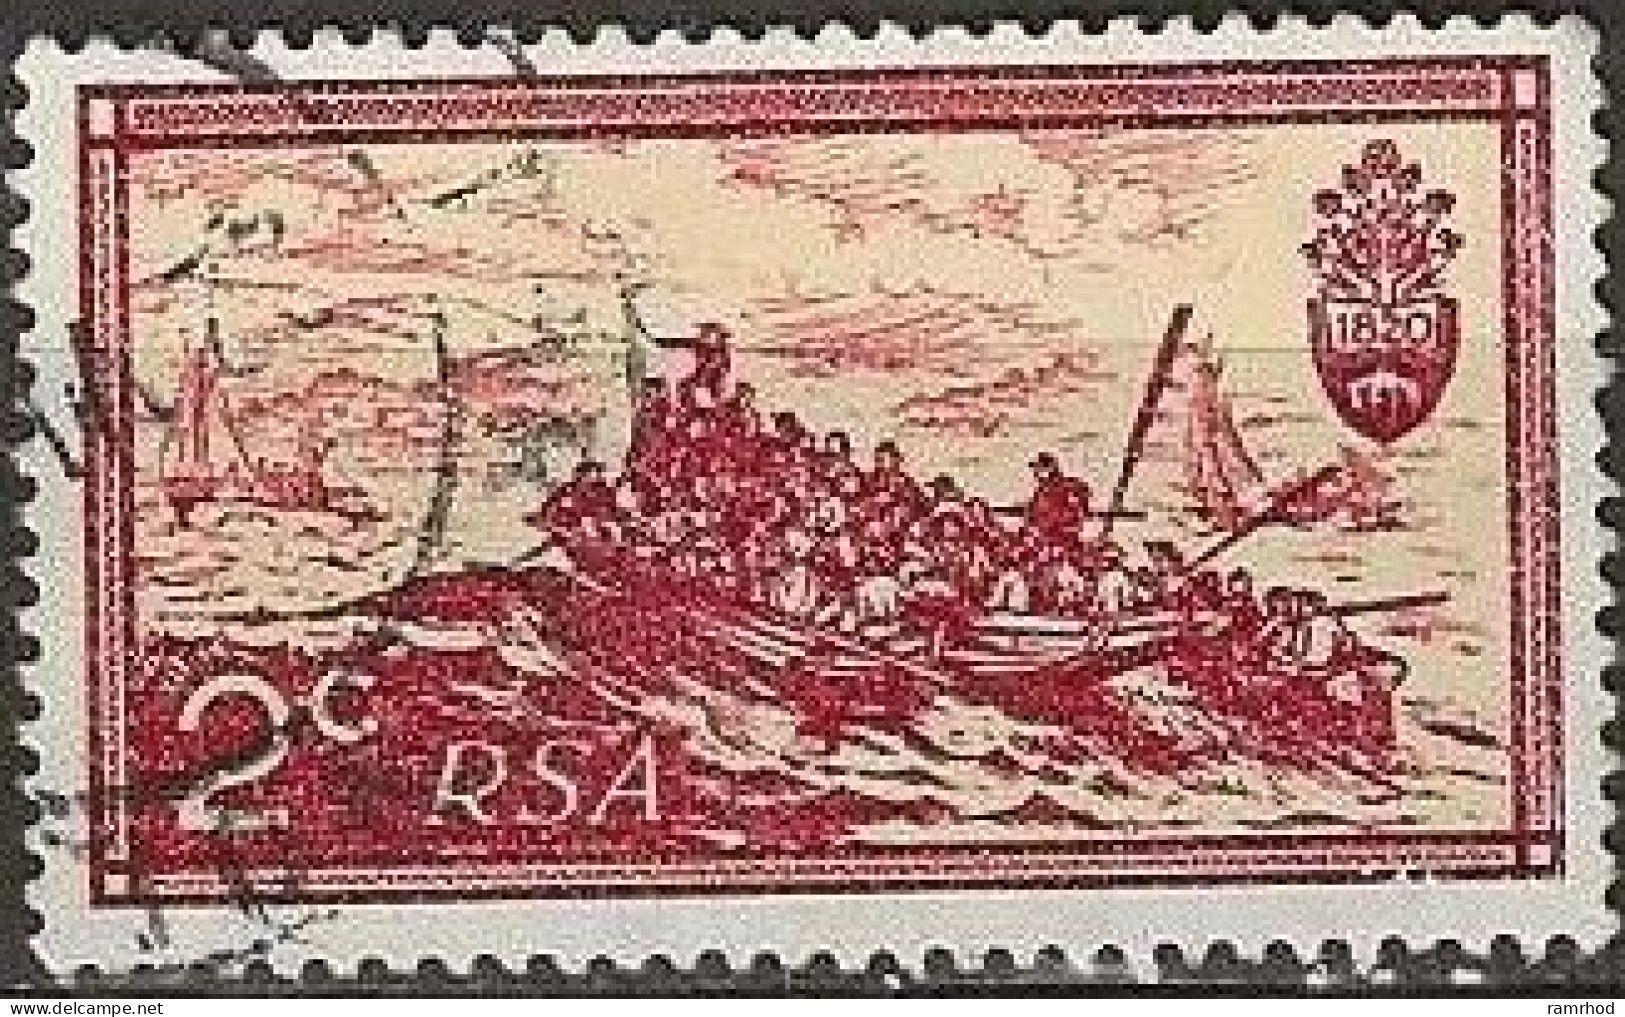 SOUTH AFRICA 1971 Tenth Anniversary Of Republic Of South Africa. - 2c Landing Of British Settlers, 1820 (T. Baines) FU - Usados